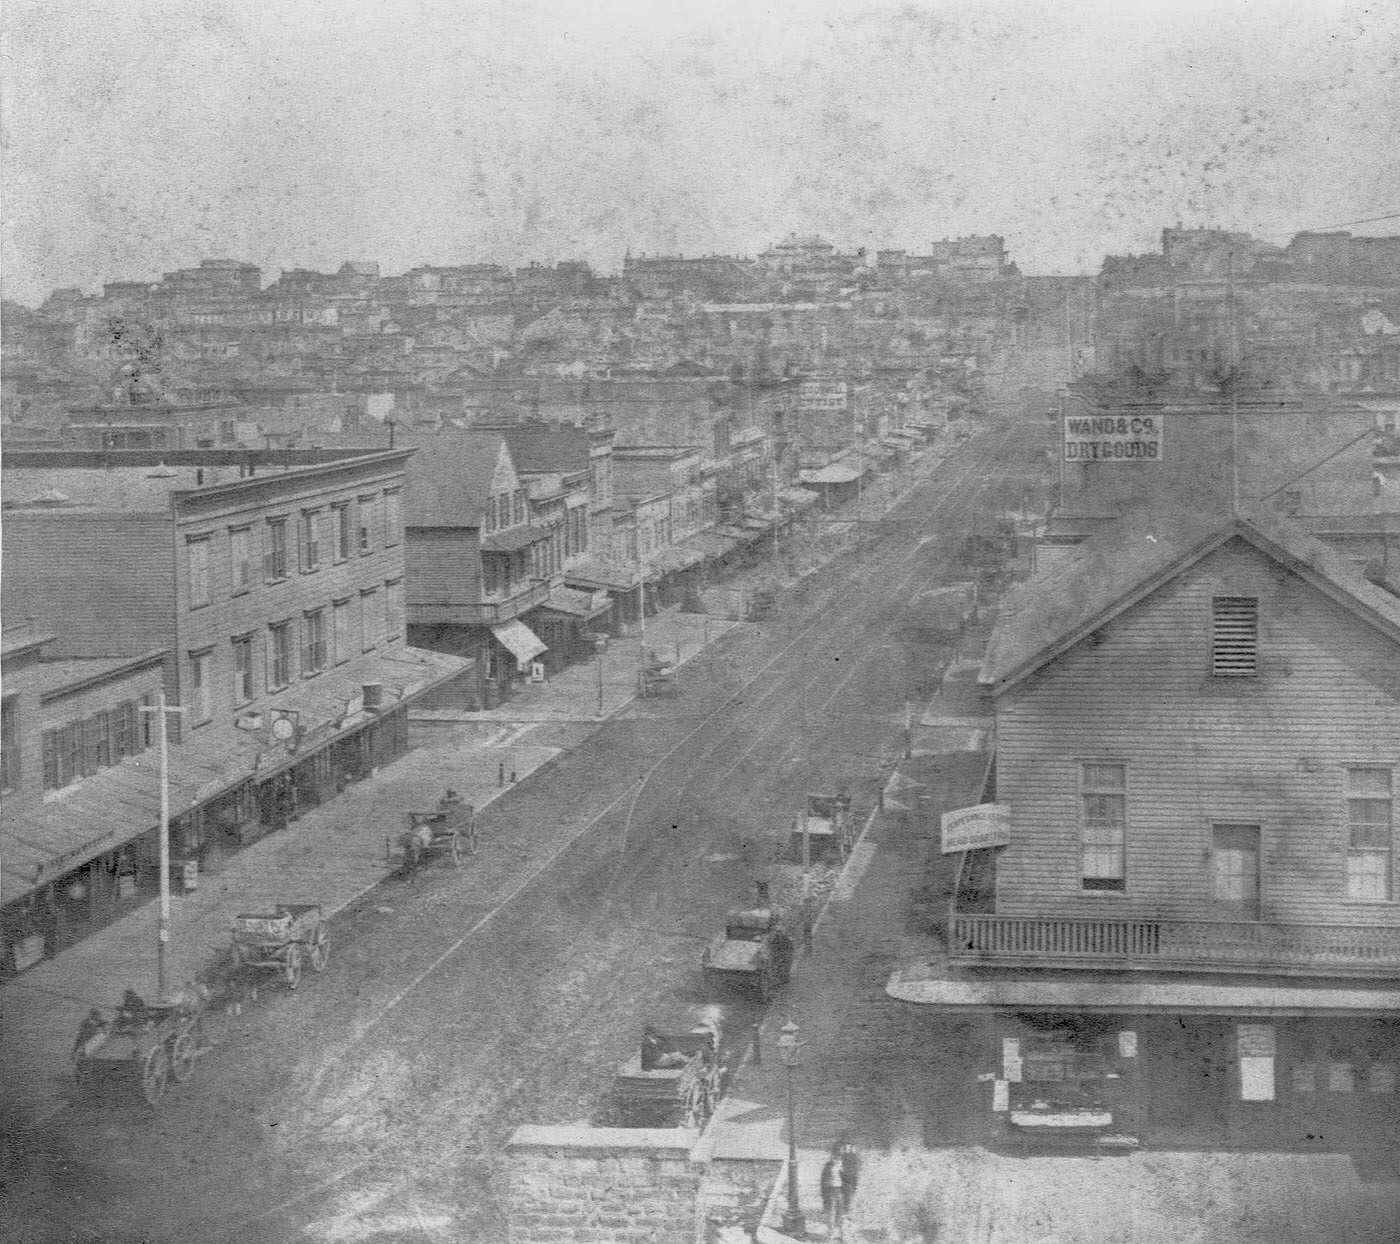 Businesses line broad, flat Second Street in San Francisco, 1850